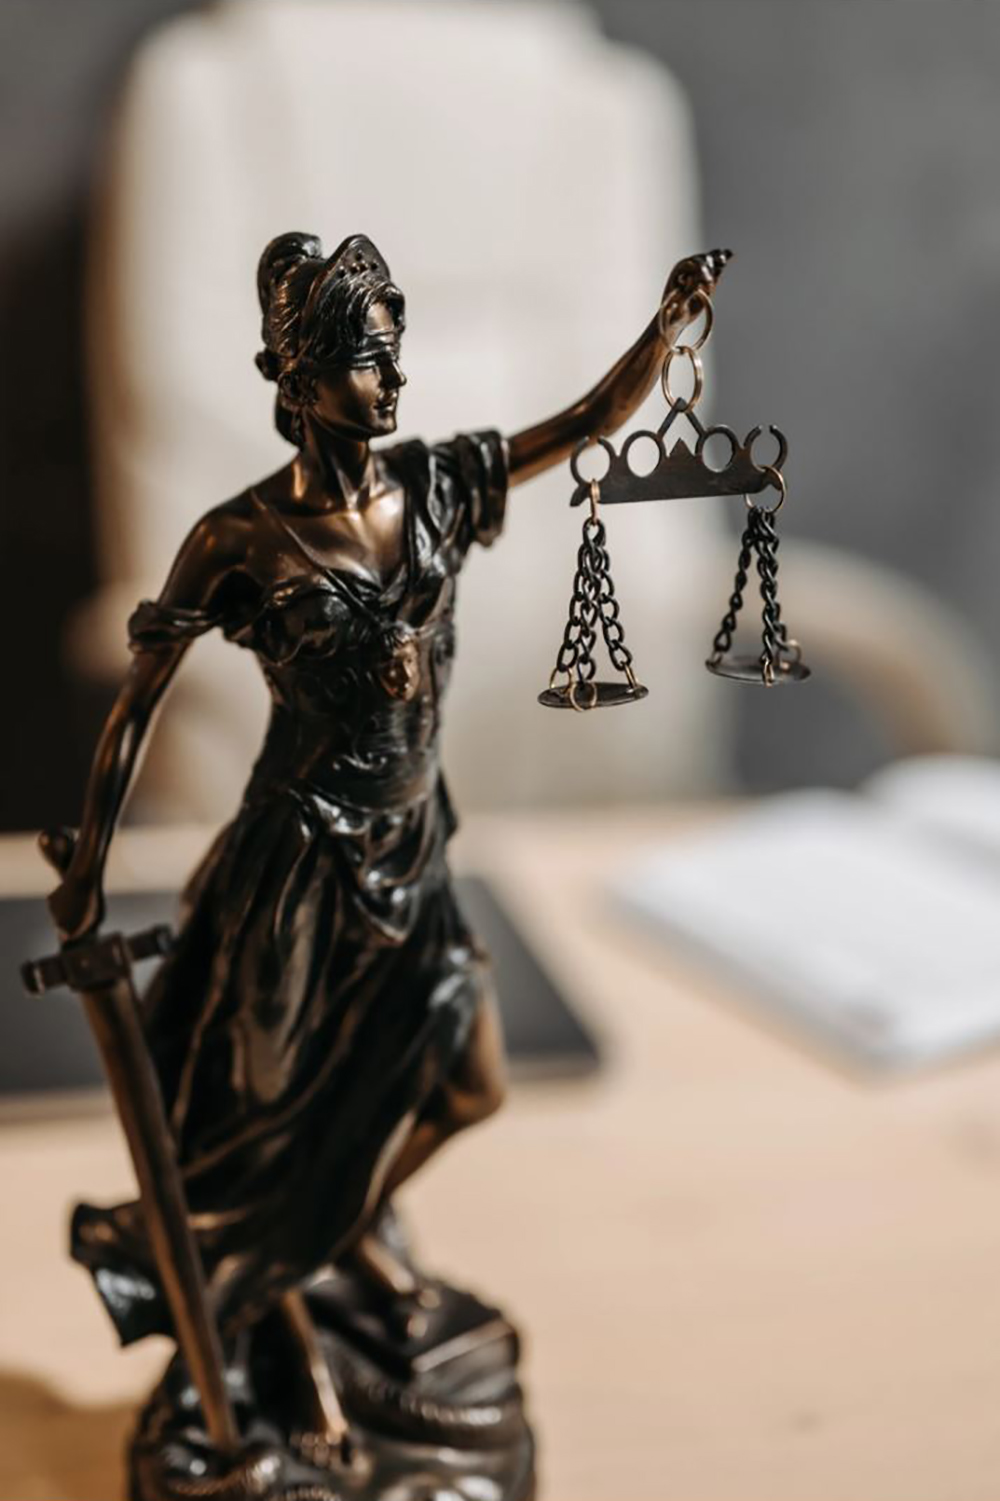 bronze statue of Lady Justice sits on a desk